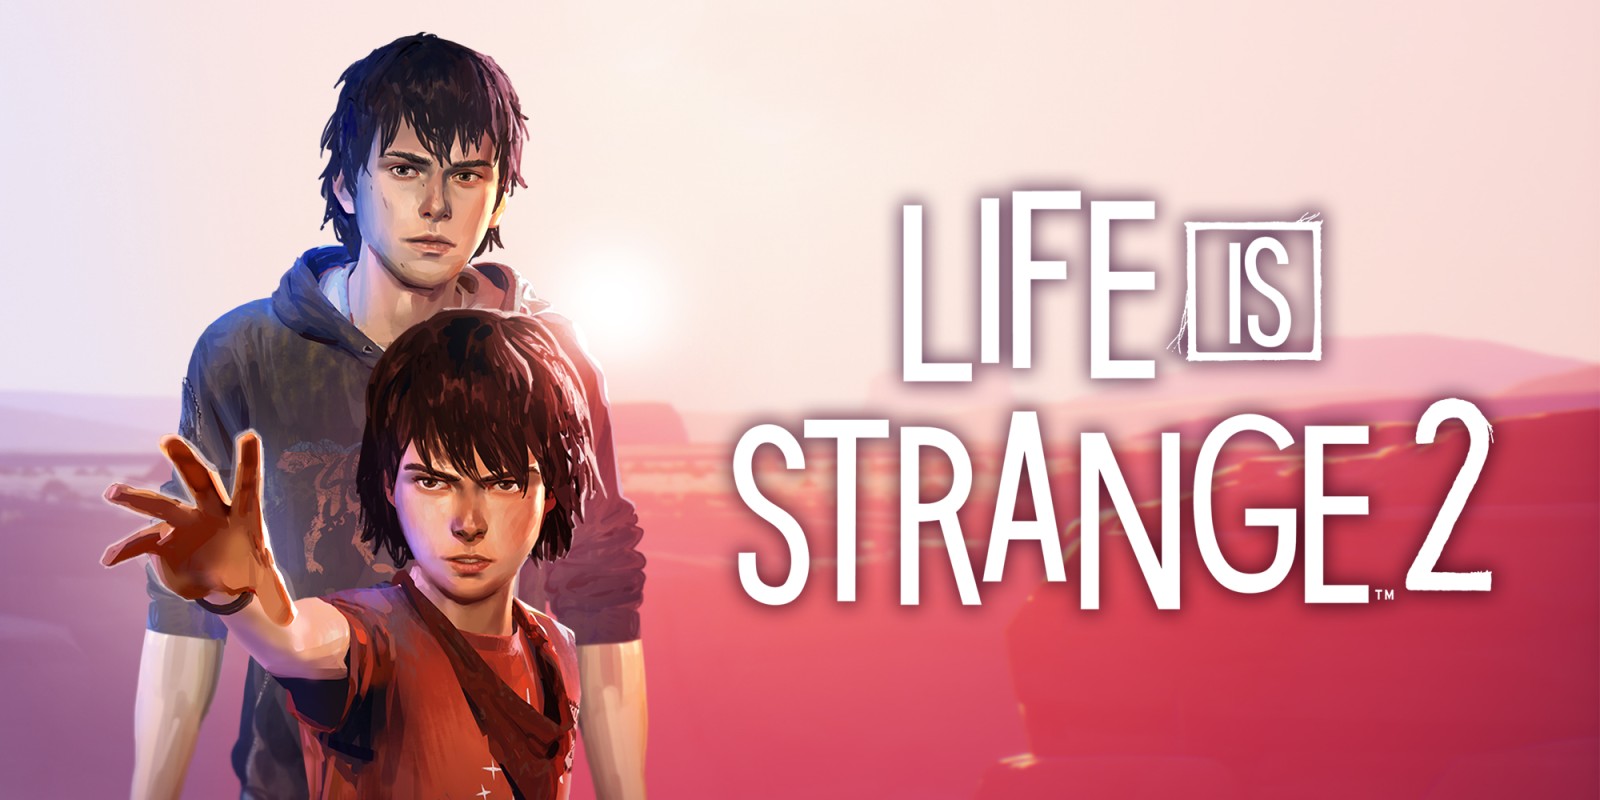 Life is Strange 2 is coming on Nintendo Switch